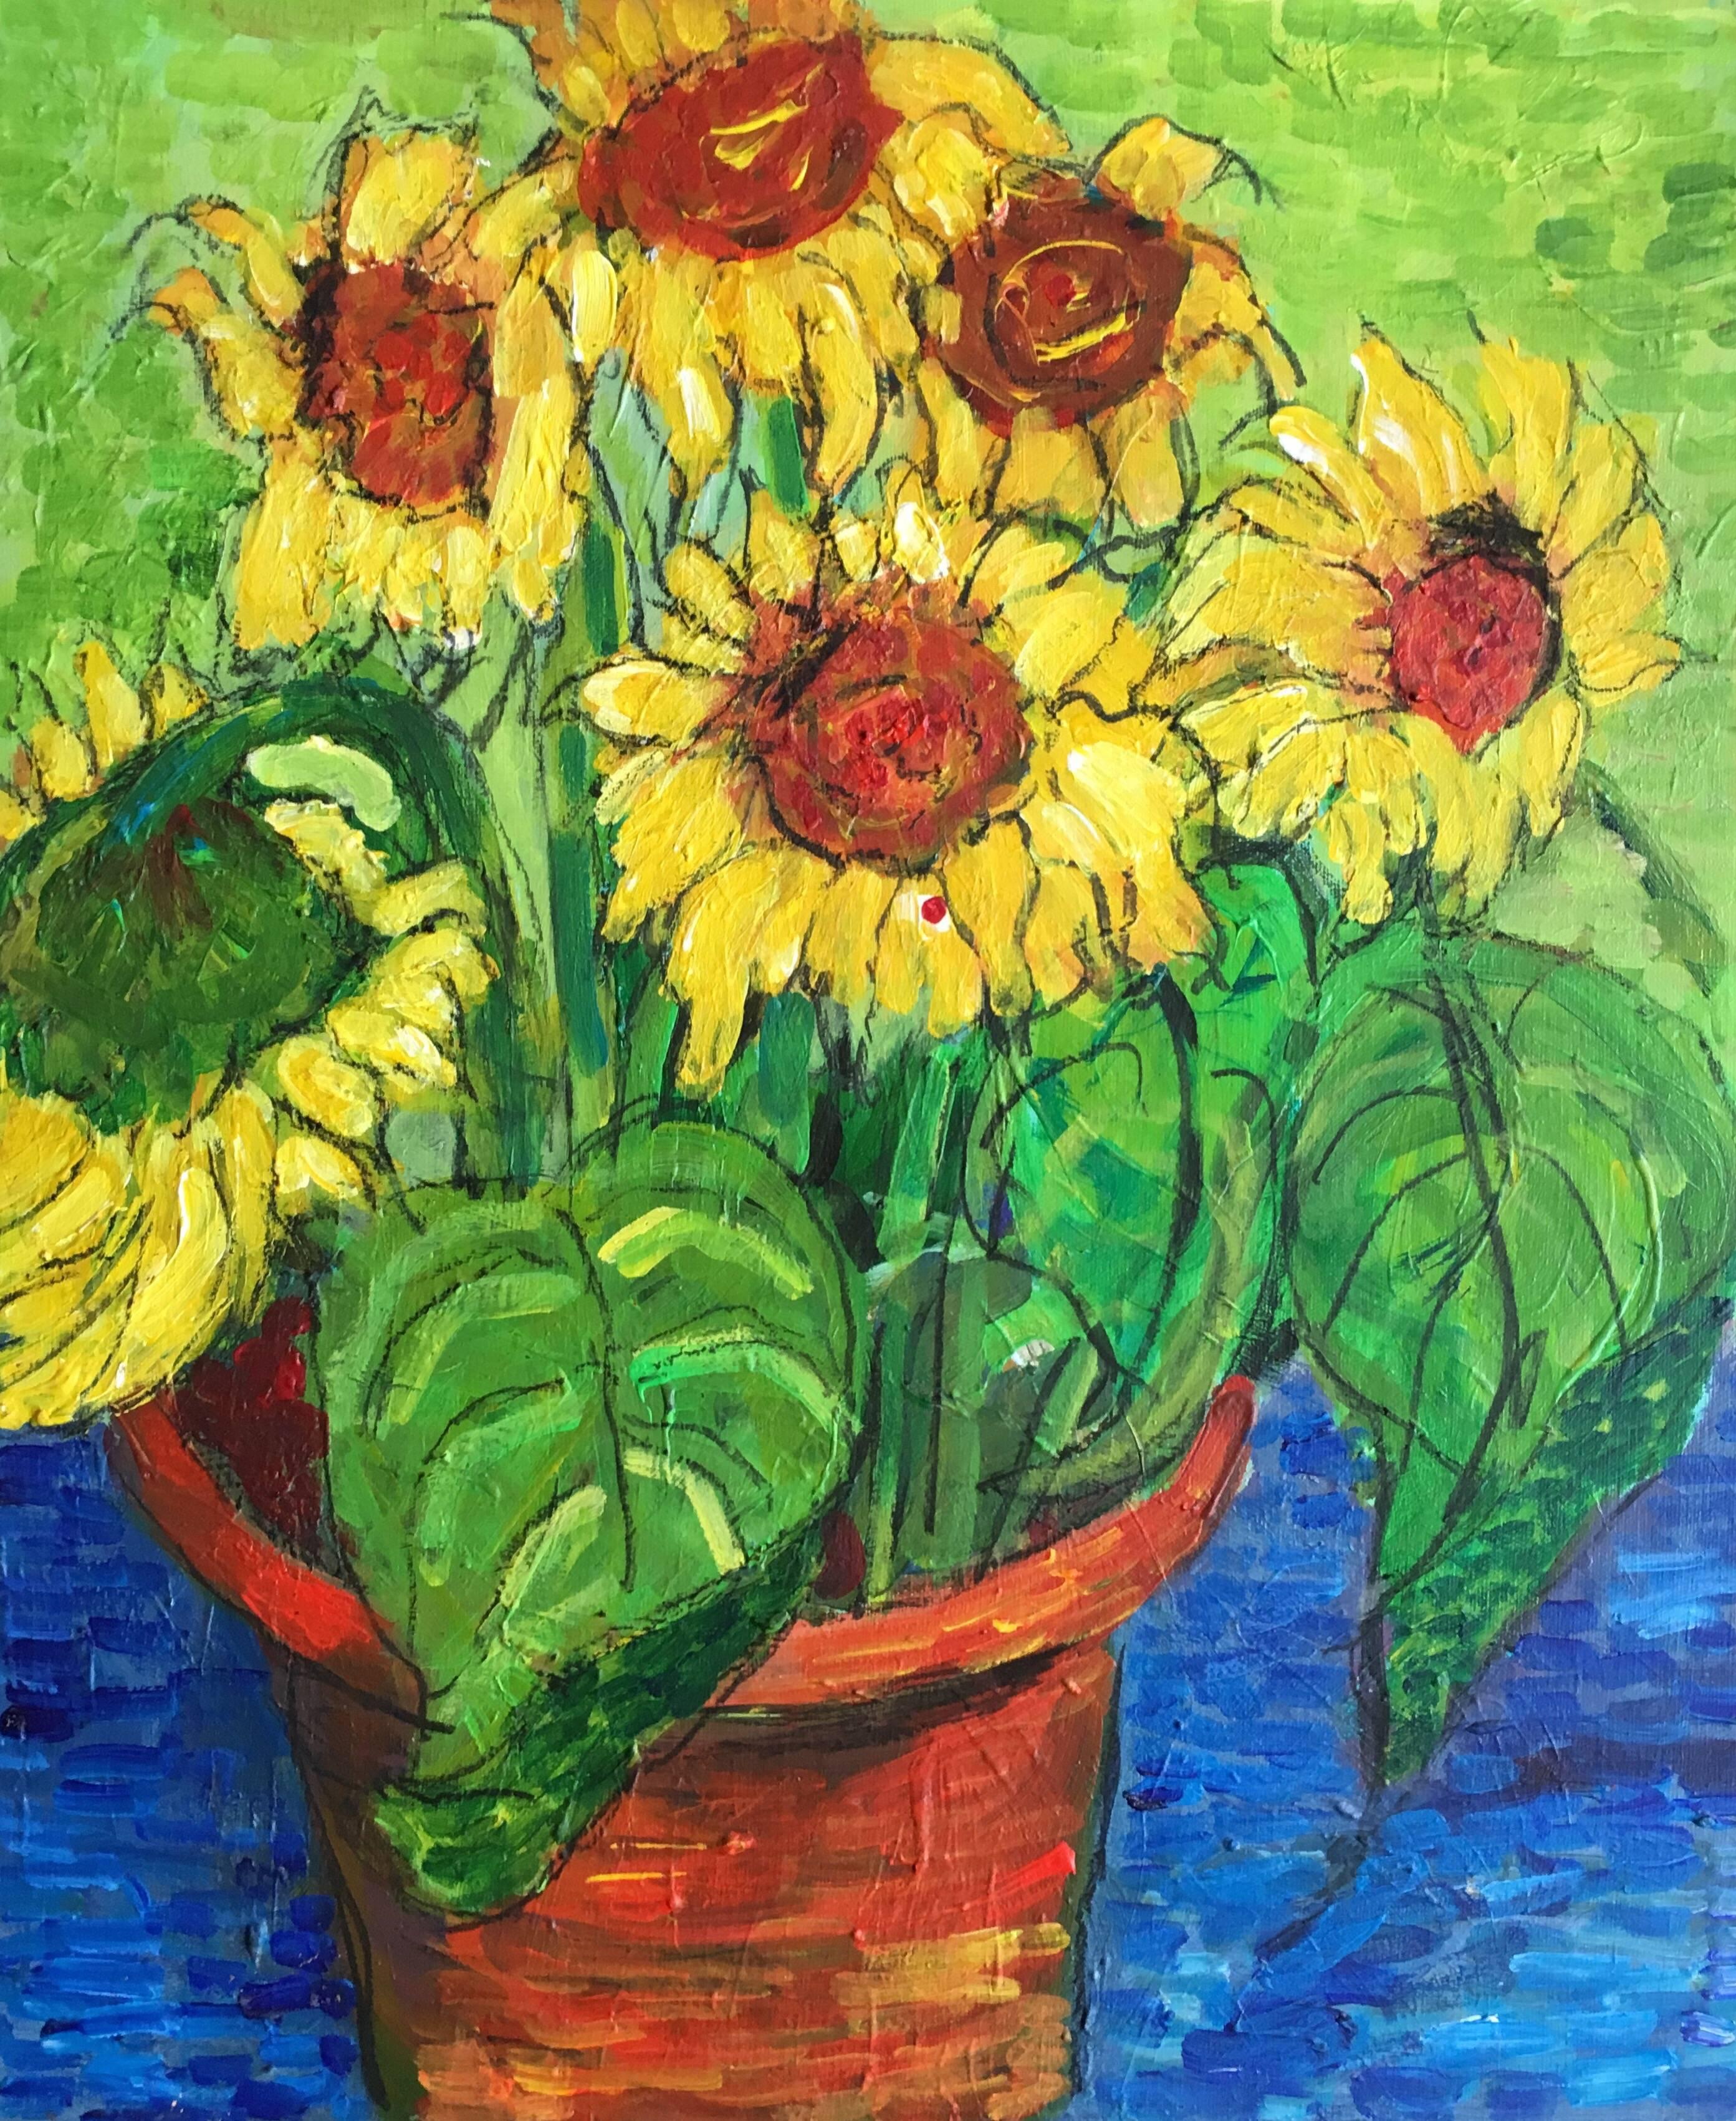 Sunflowers Growing in a Pot, Still Life Oil Painting British Artist